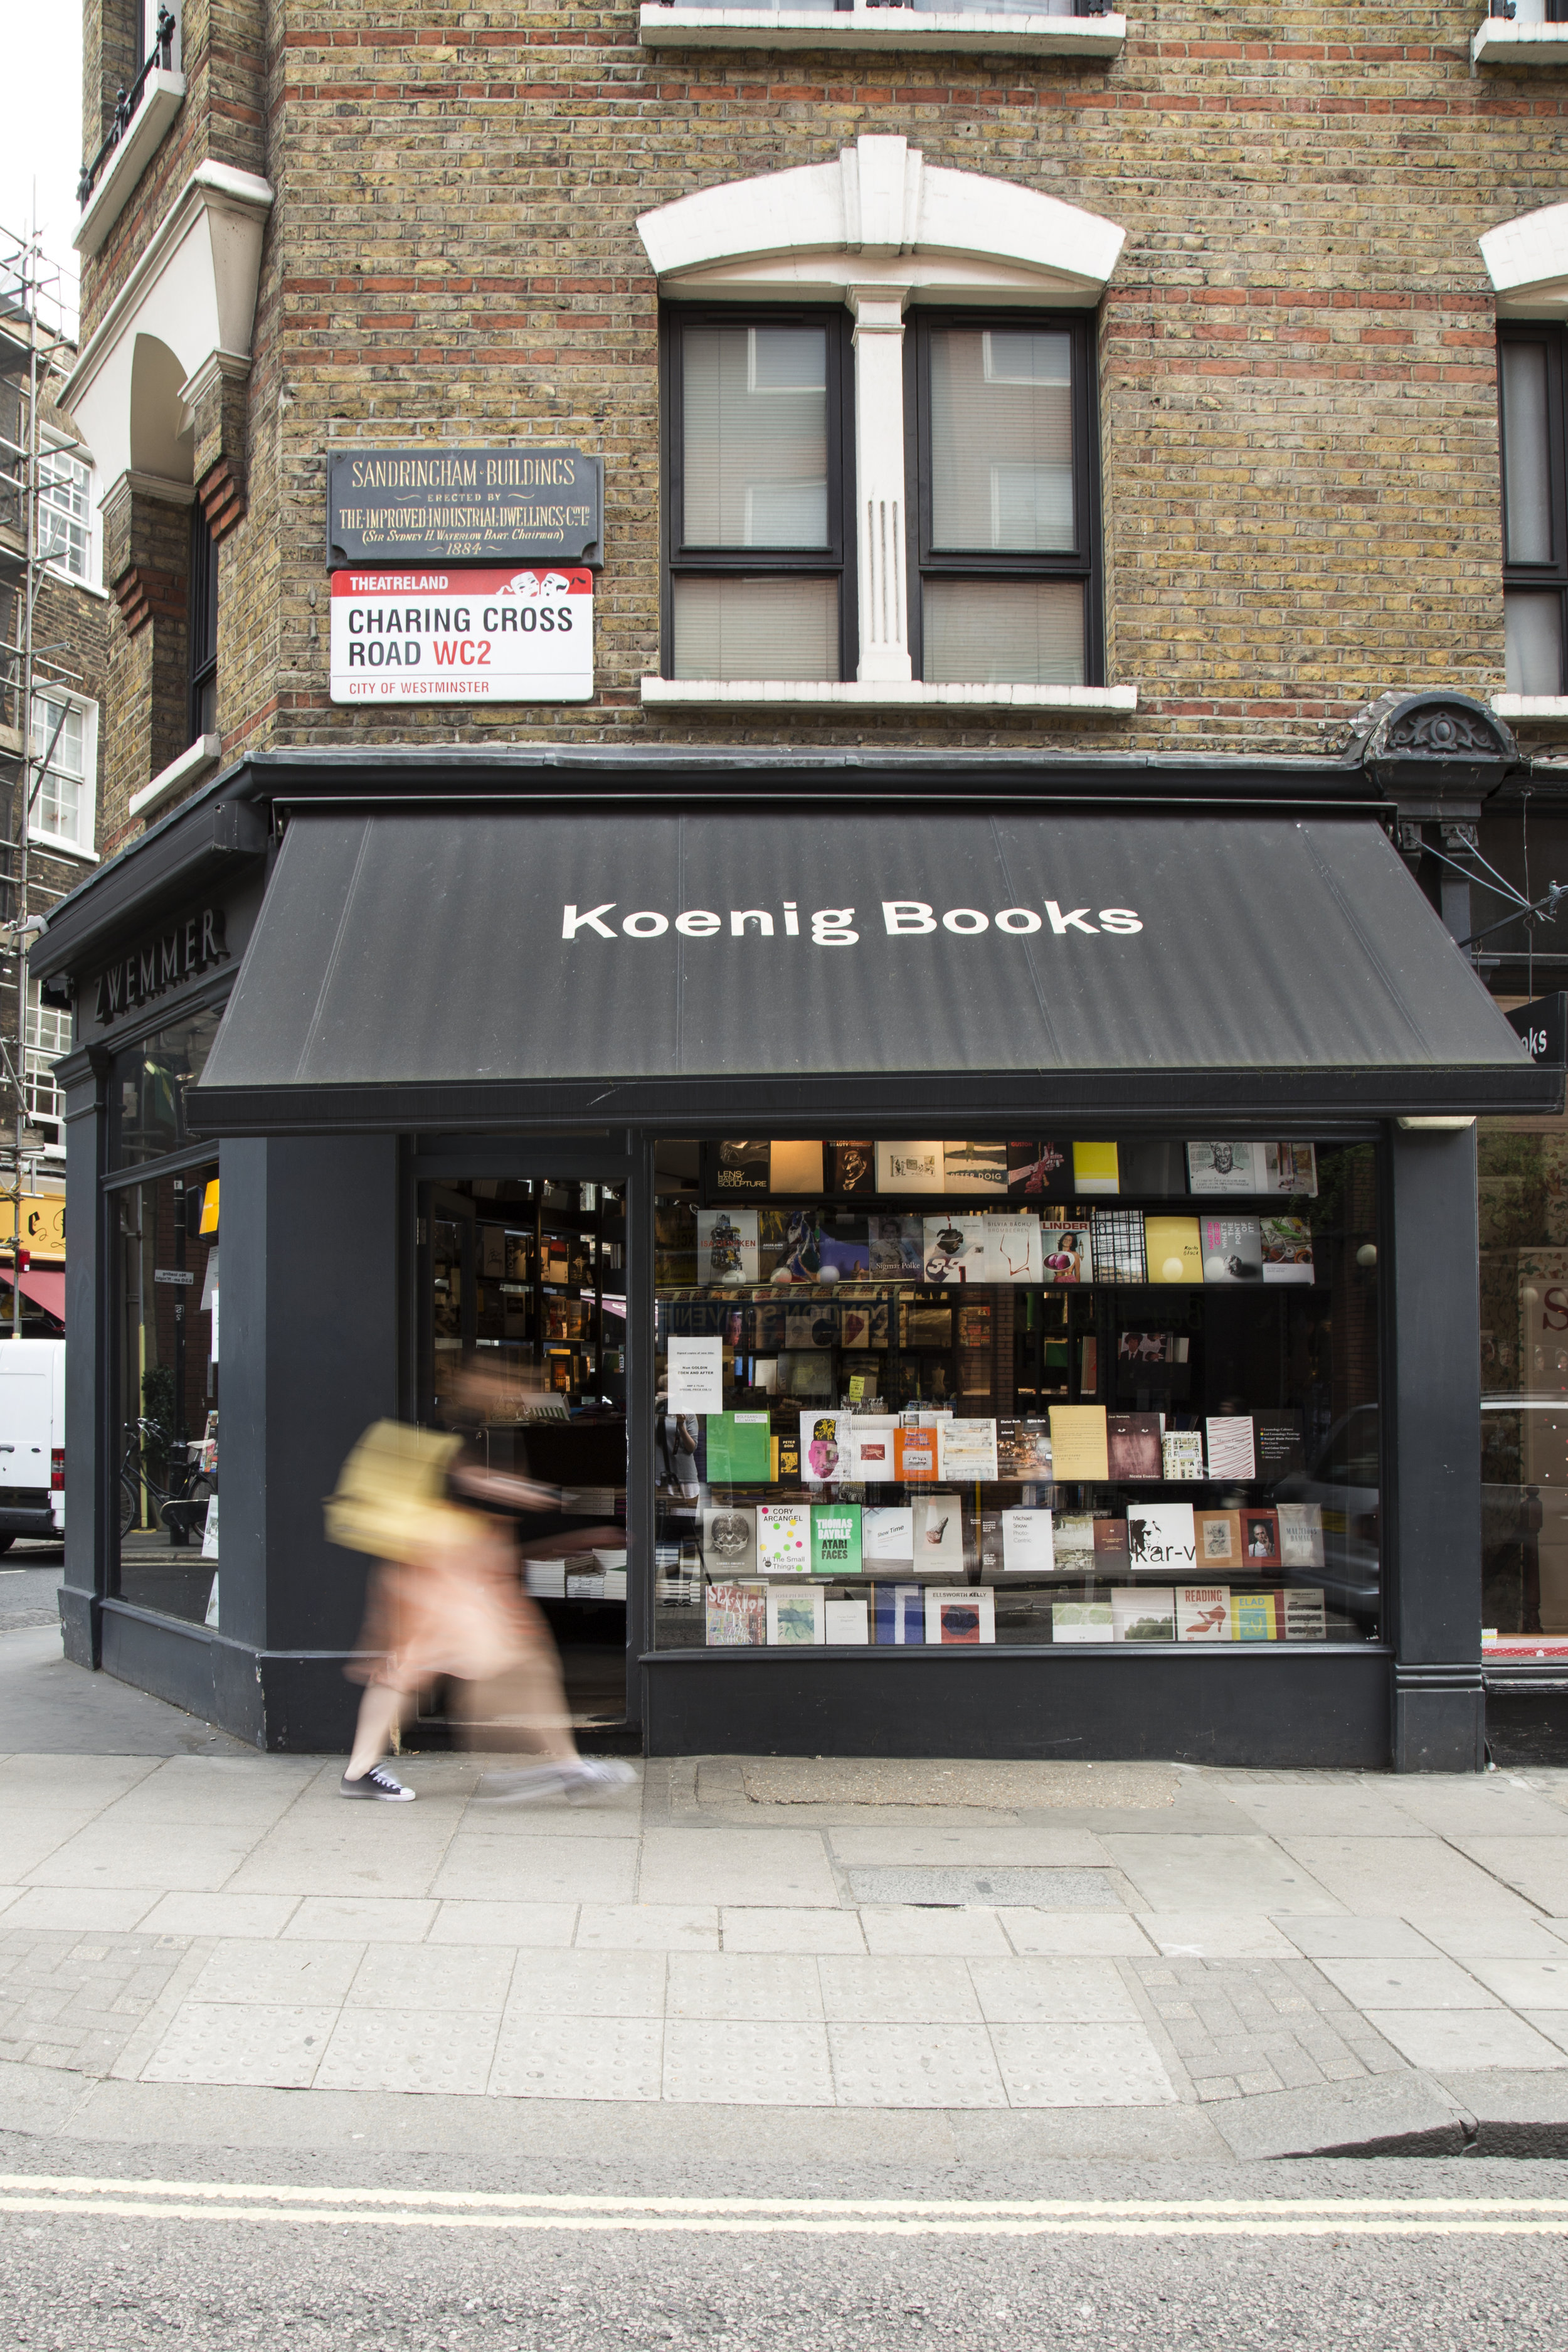  Koenig Books&nbsp;  80 Charing Cross Rd,  Koenig Books is a German-owned independent bookshop specialising in art, architecture, design and photography. Koenig Books is a branch of Walther Koenig Books Ltd, Europe’s largest independent bookshop spec